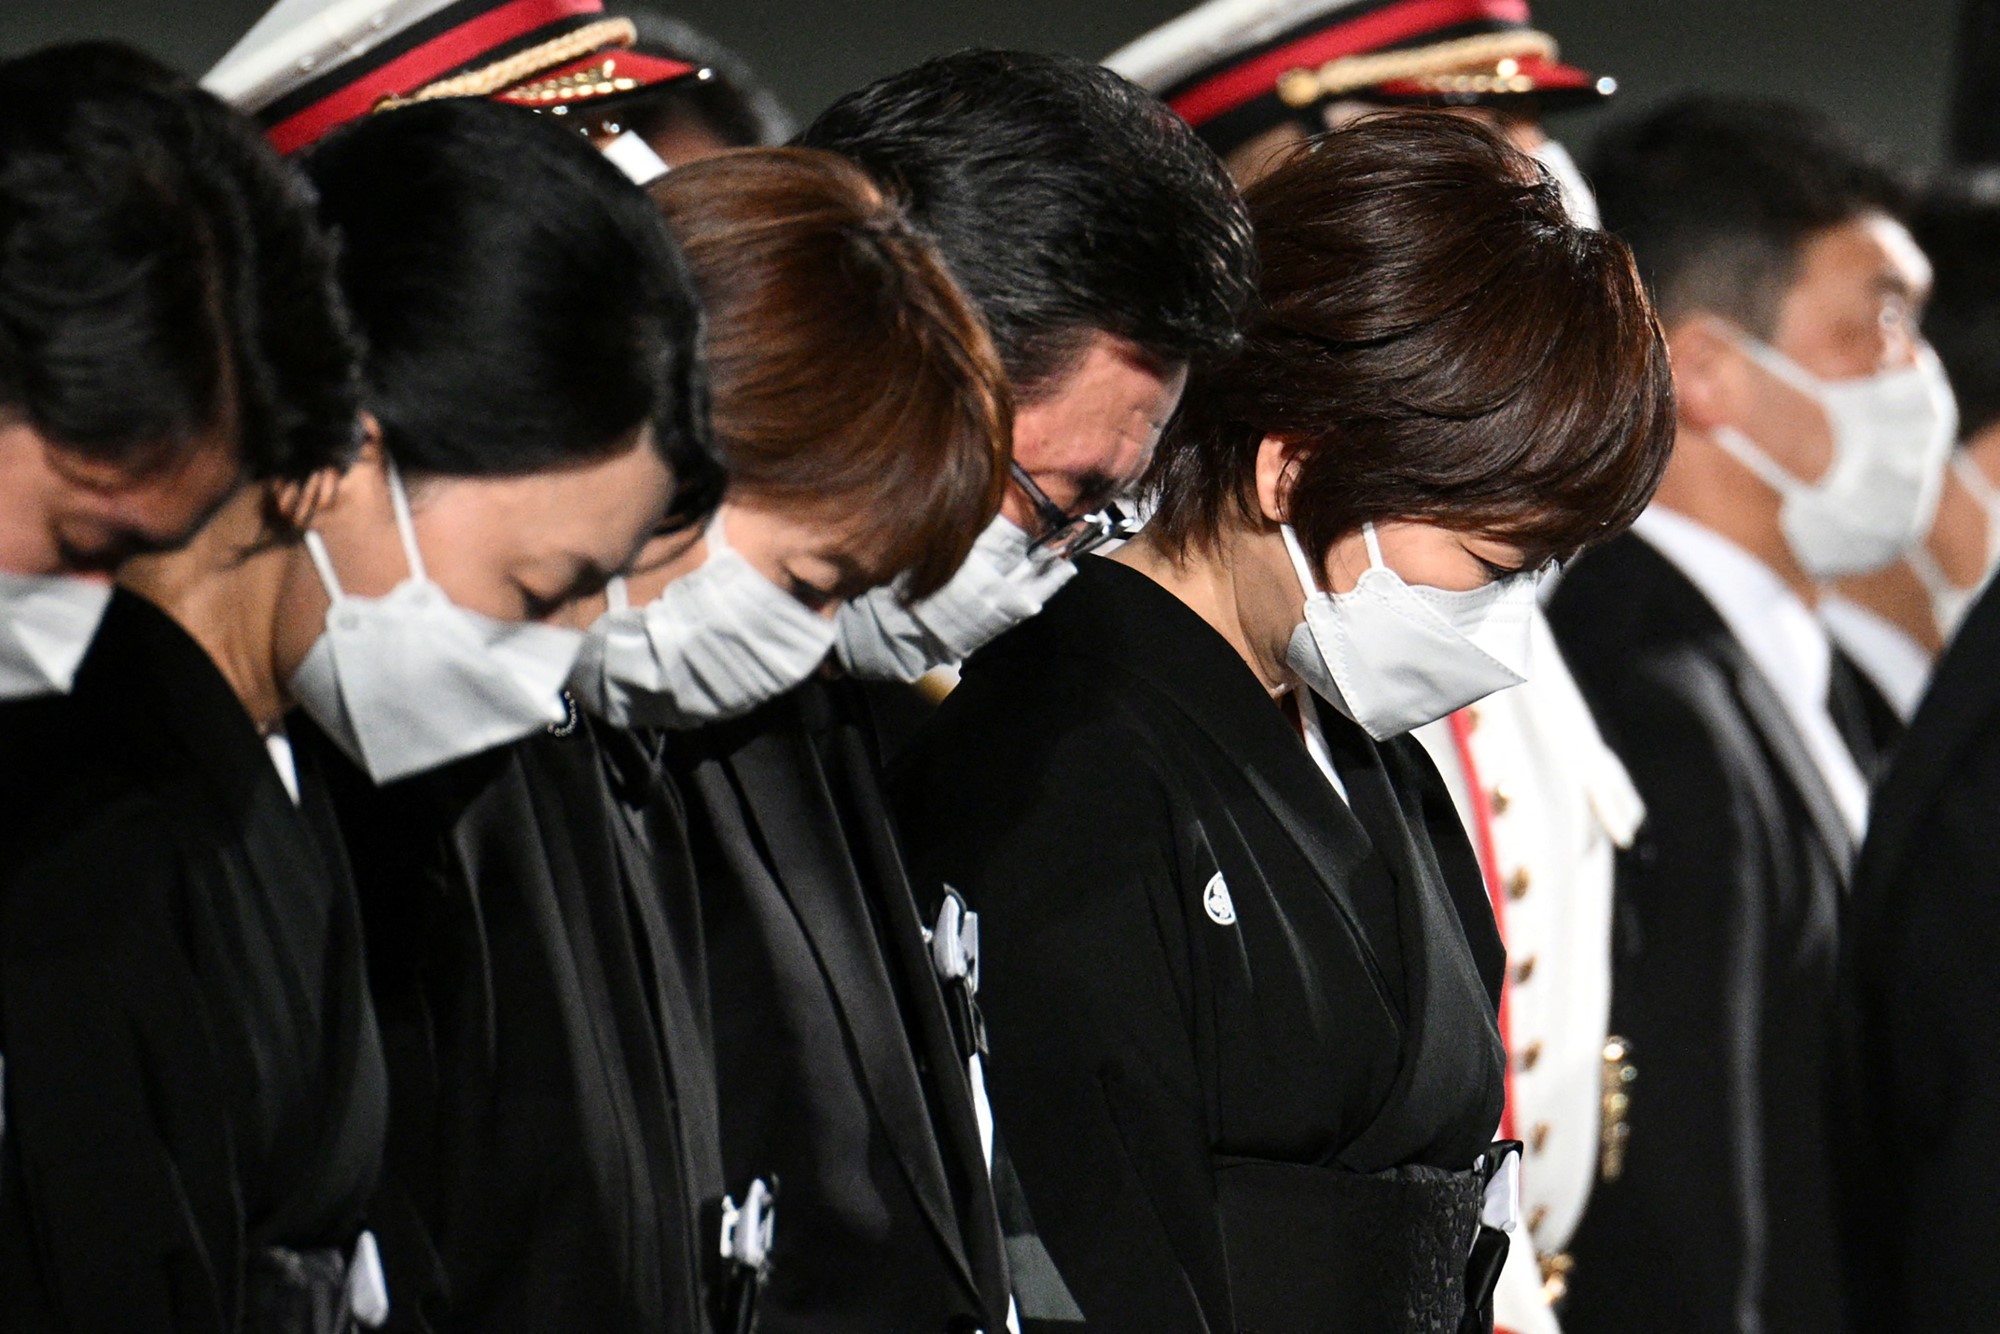 The widow of former Japanese prime minister Shinzo Abe, Akie Abe (R), bows her head